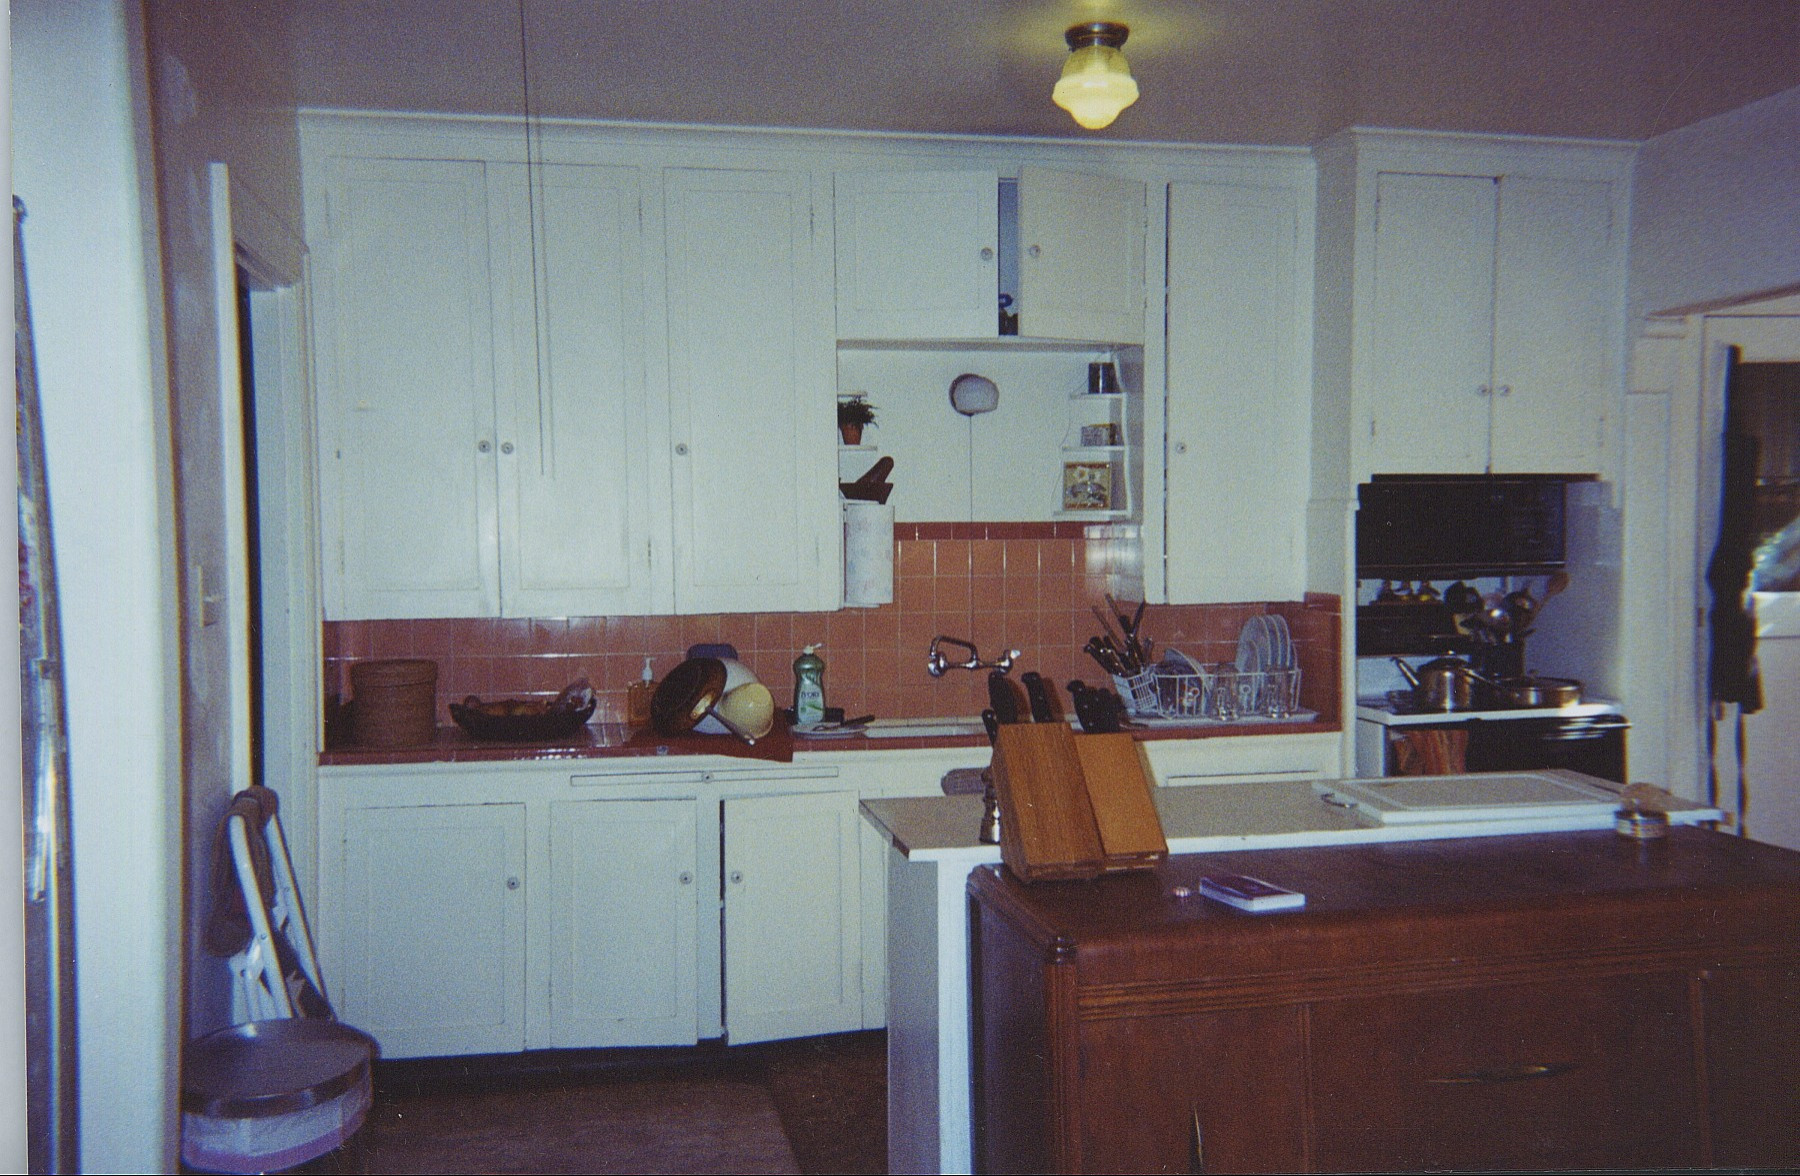 Wallingford Tudor Kitchen & Dining Room Remodel - Home Birth Year 1927